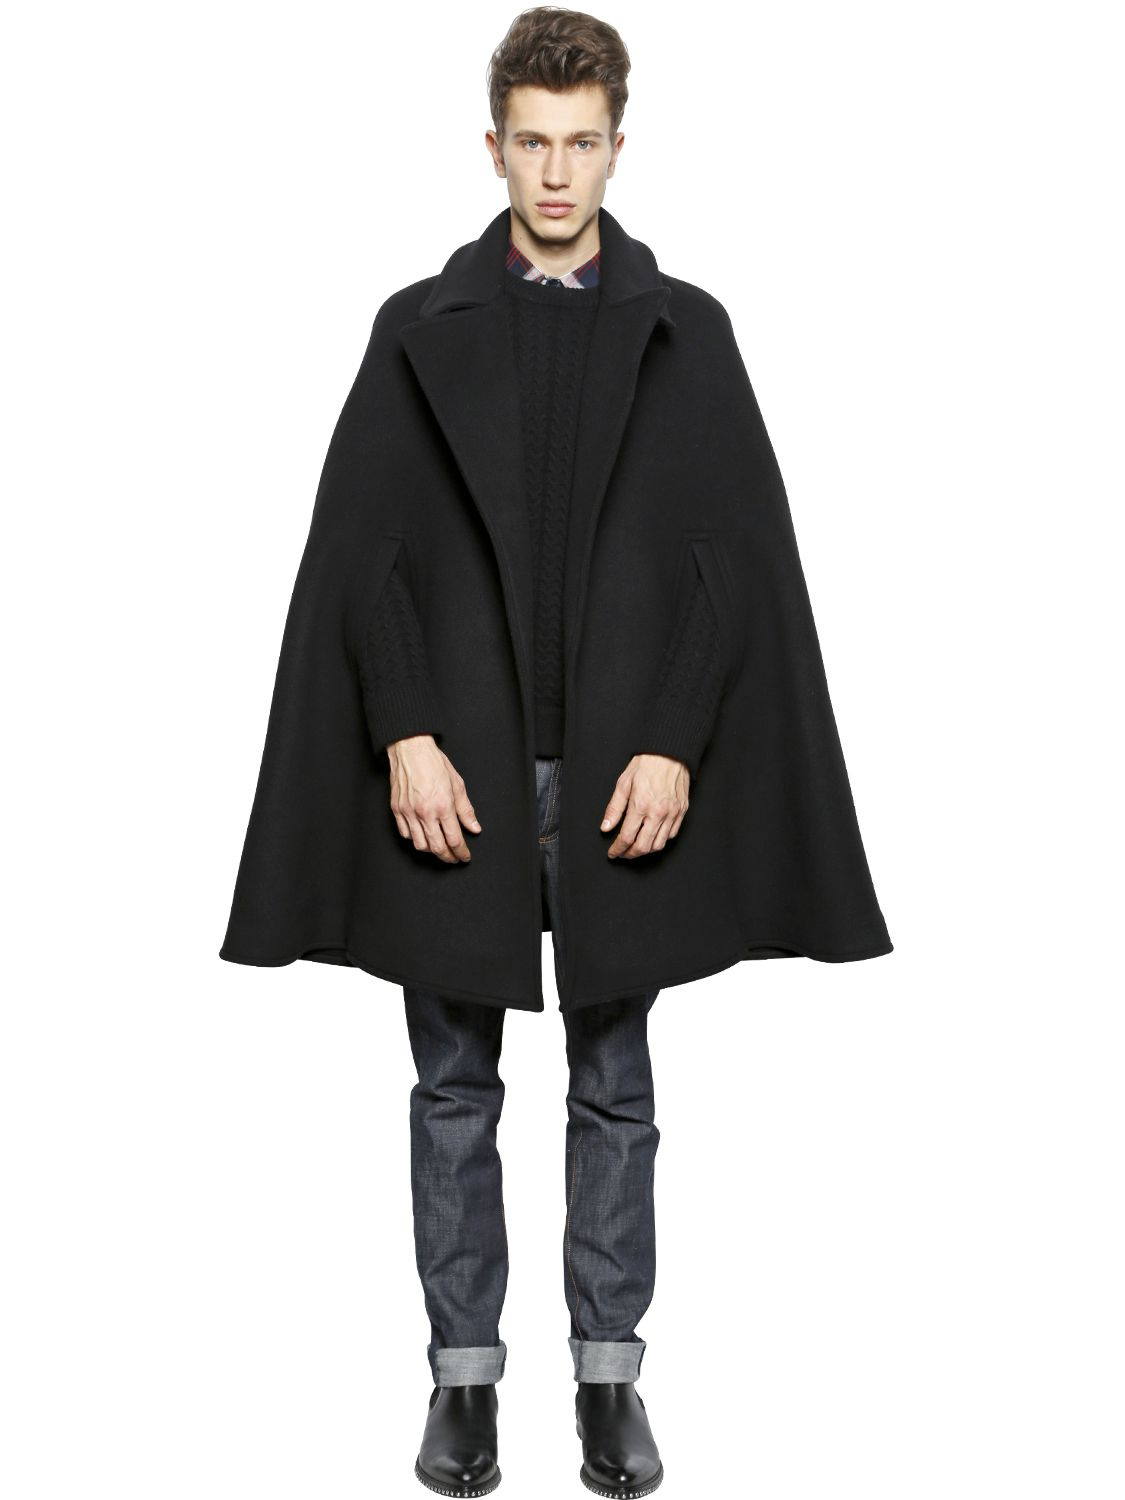 Lyst - Givenchy Wool Felt Cape in Black for Men